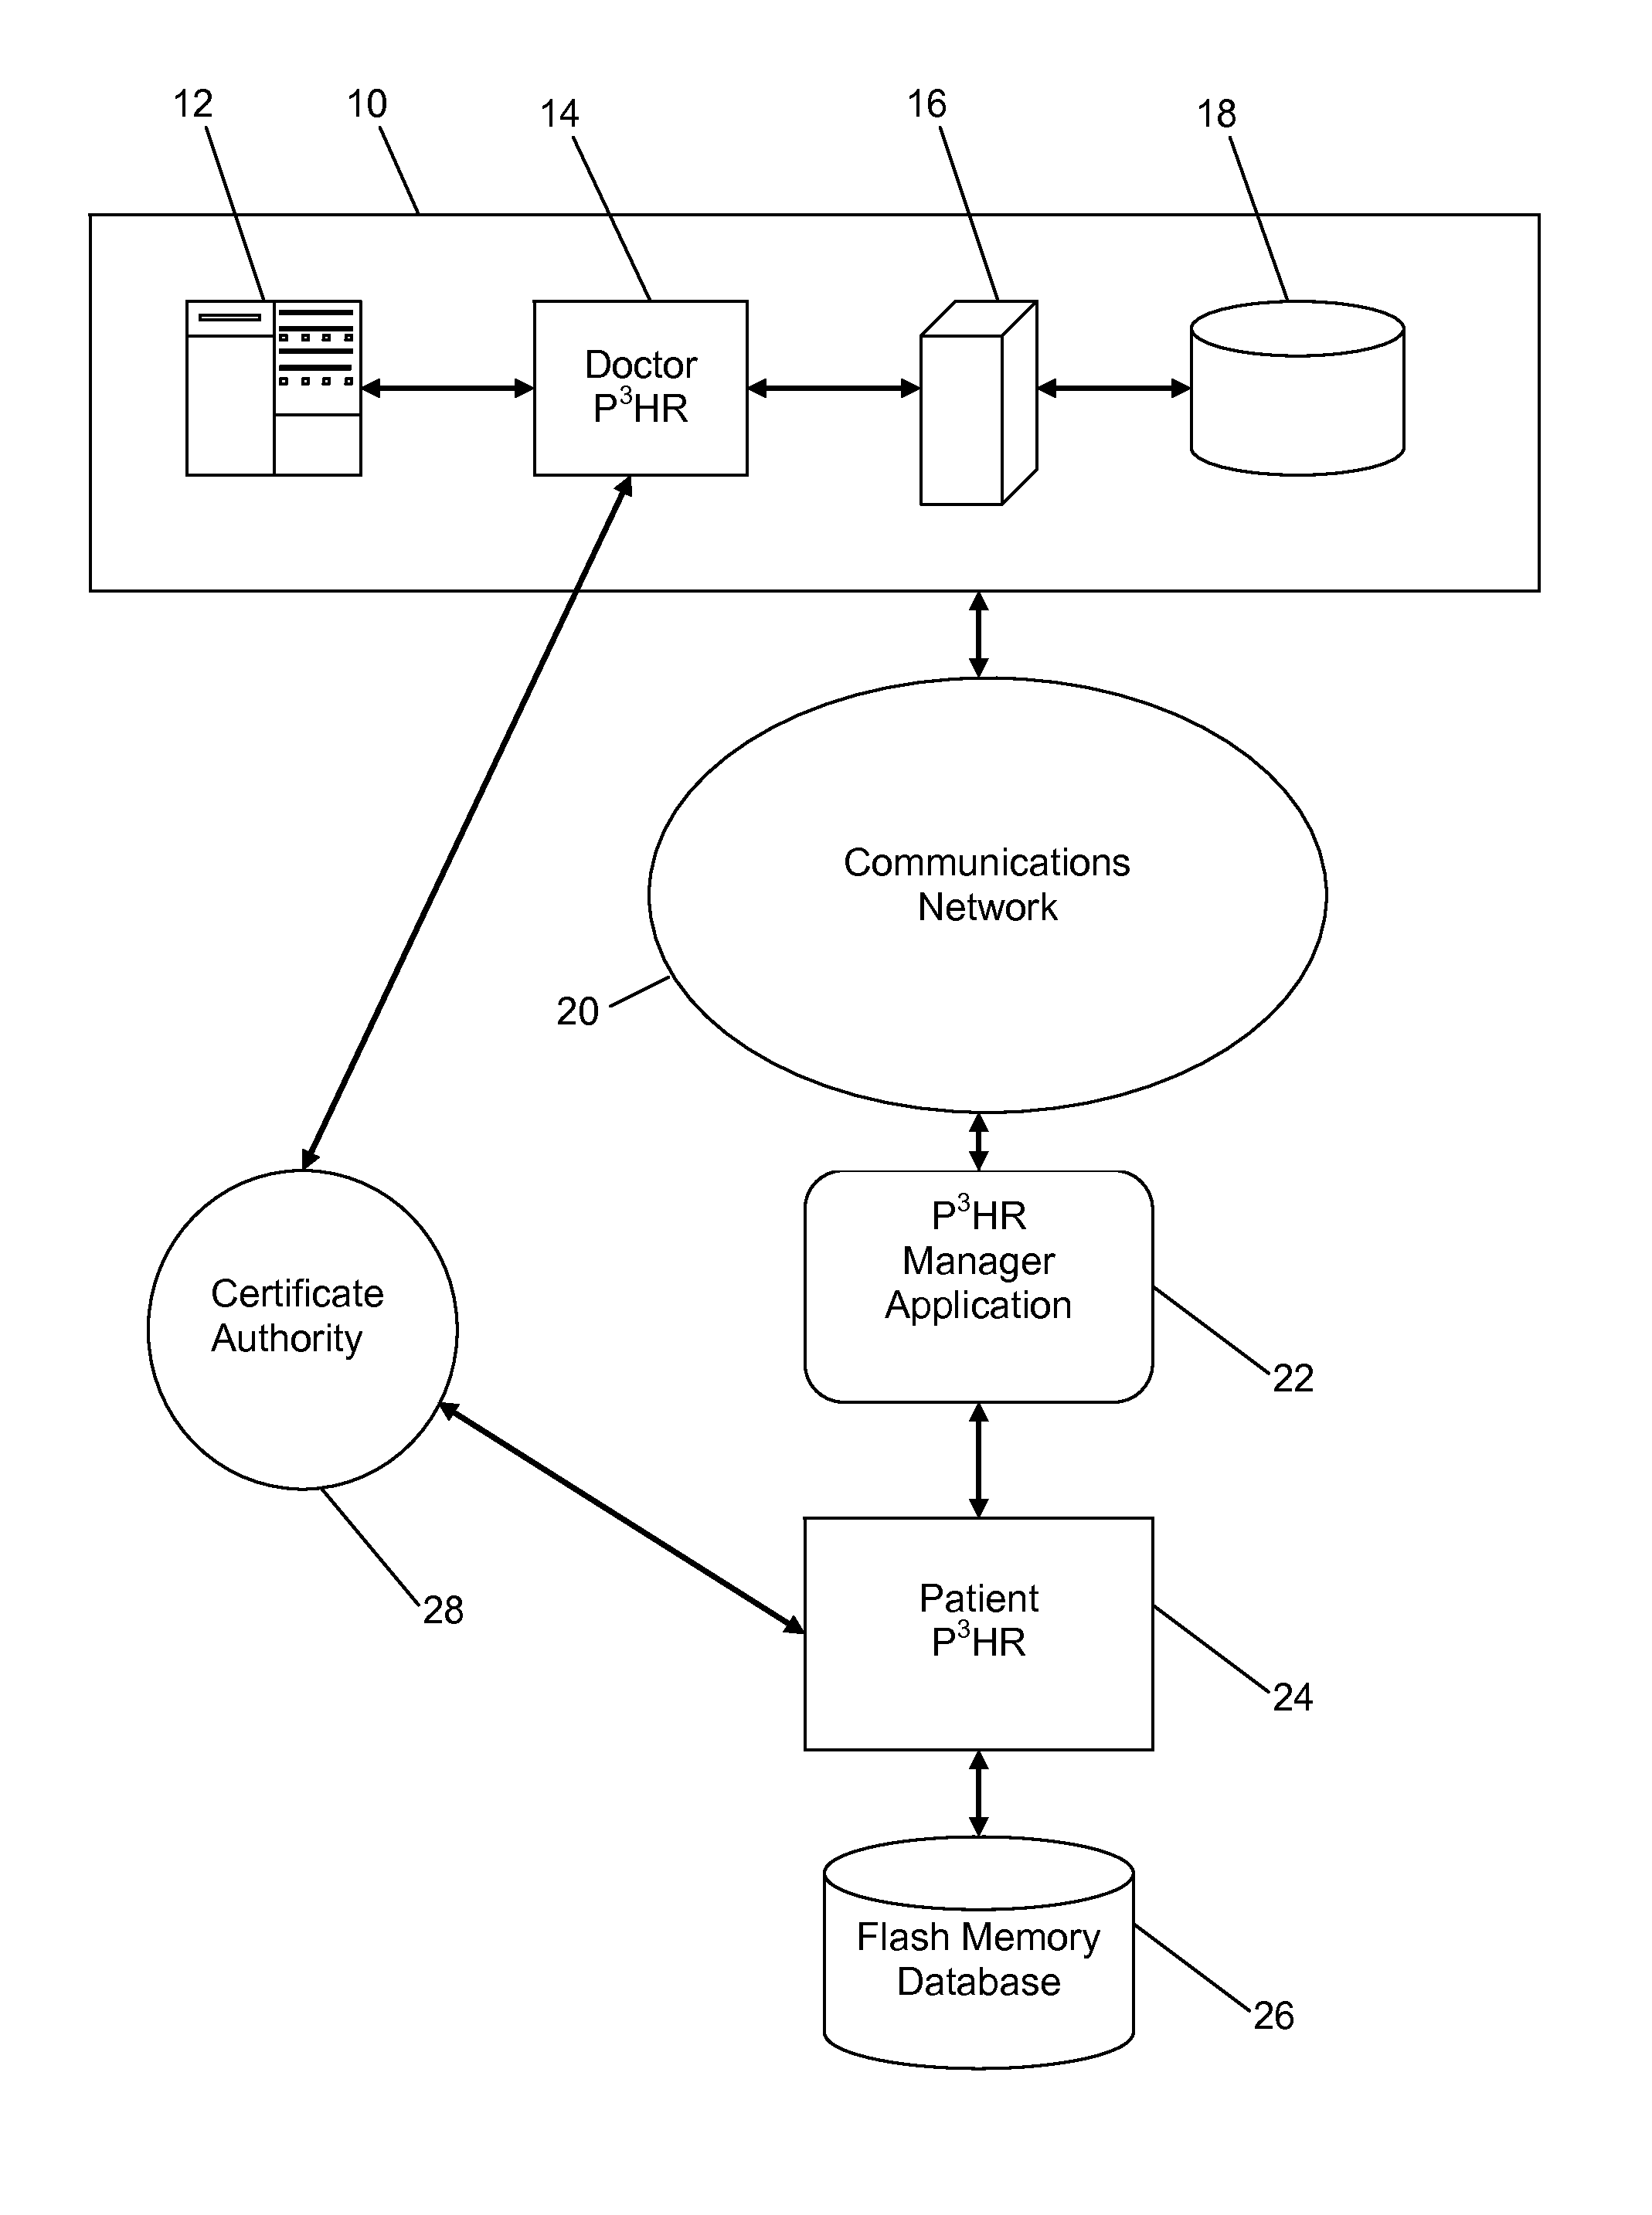 Portable health record system and method